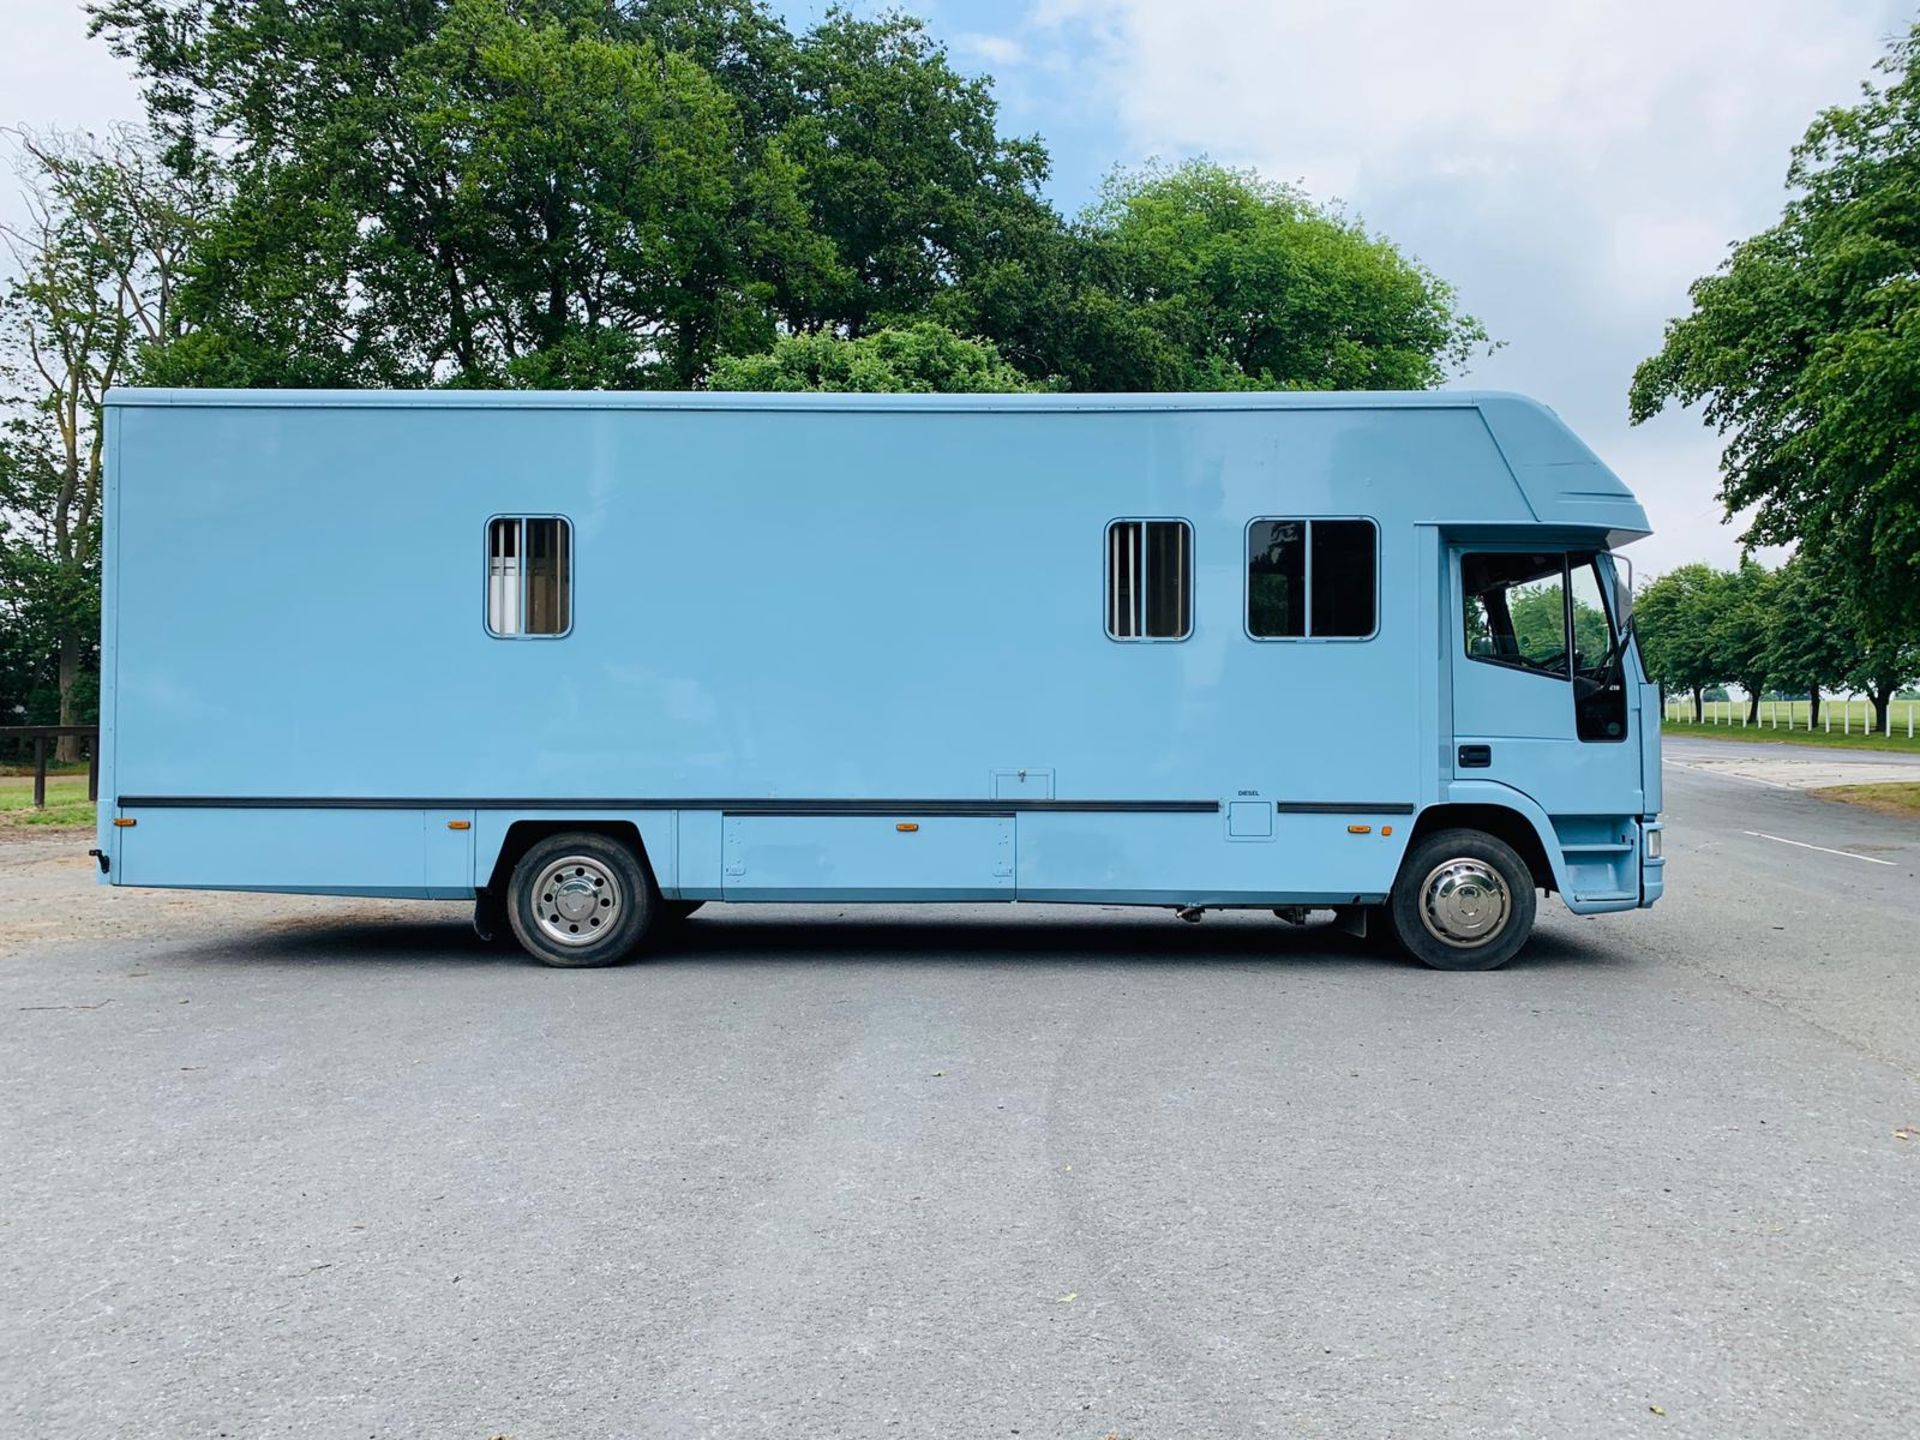 (RESERVE MET) Iveco 110E18 'OLYMPIC' Horsebox 2001 - 6 Speed - Fits 4/6 Forward Facing Horses - Image 10 of 26